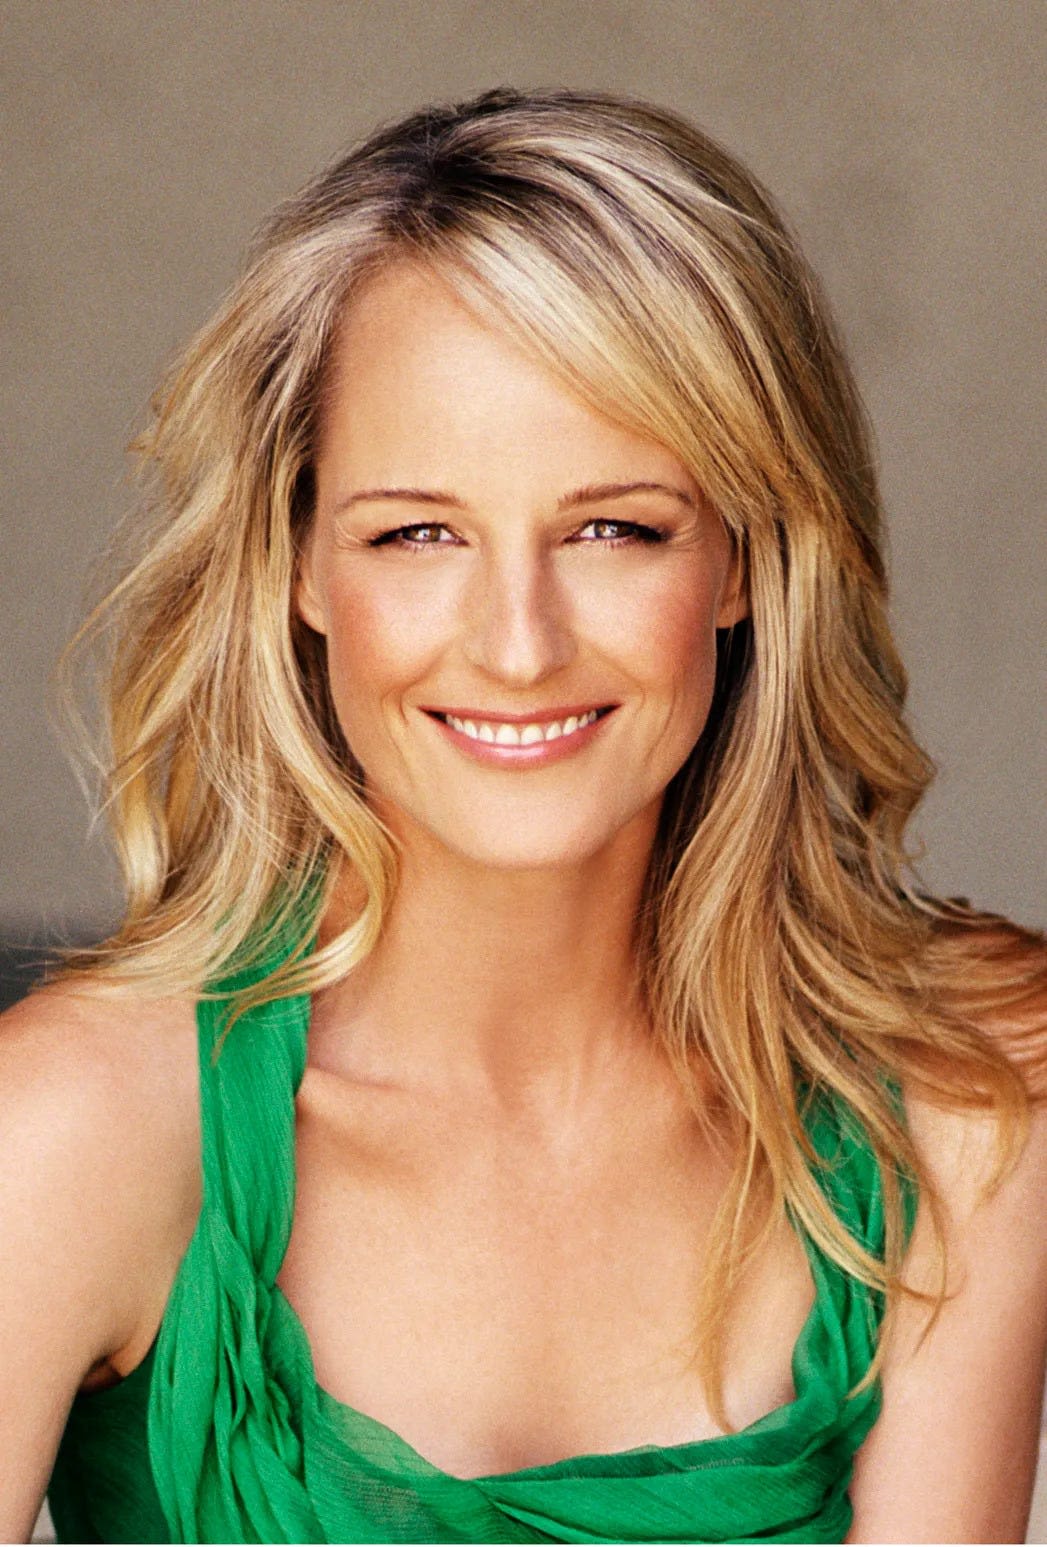 Oscar winner Helen Hunt to appear at Motor City Comic Con and live screening of 'Twister'